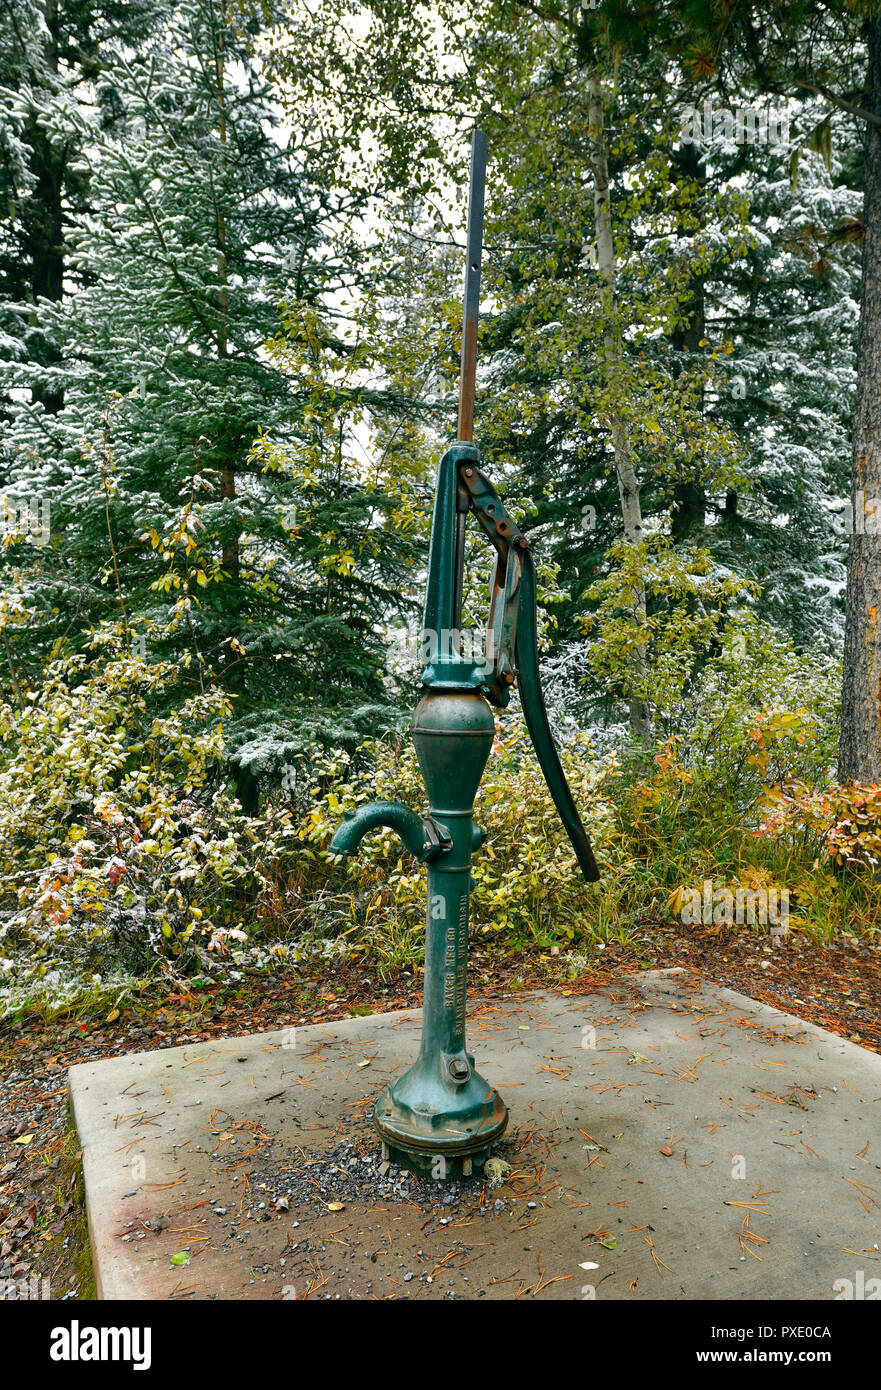 A hand operated pump to pump fresh water from the ground at Kelly's Bathtub  in Switzer Park on highway 40 north in rural Alberta Canada Stock Photo -  Alamy